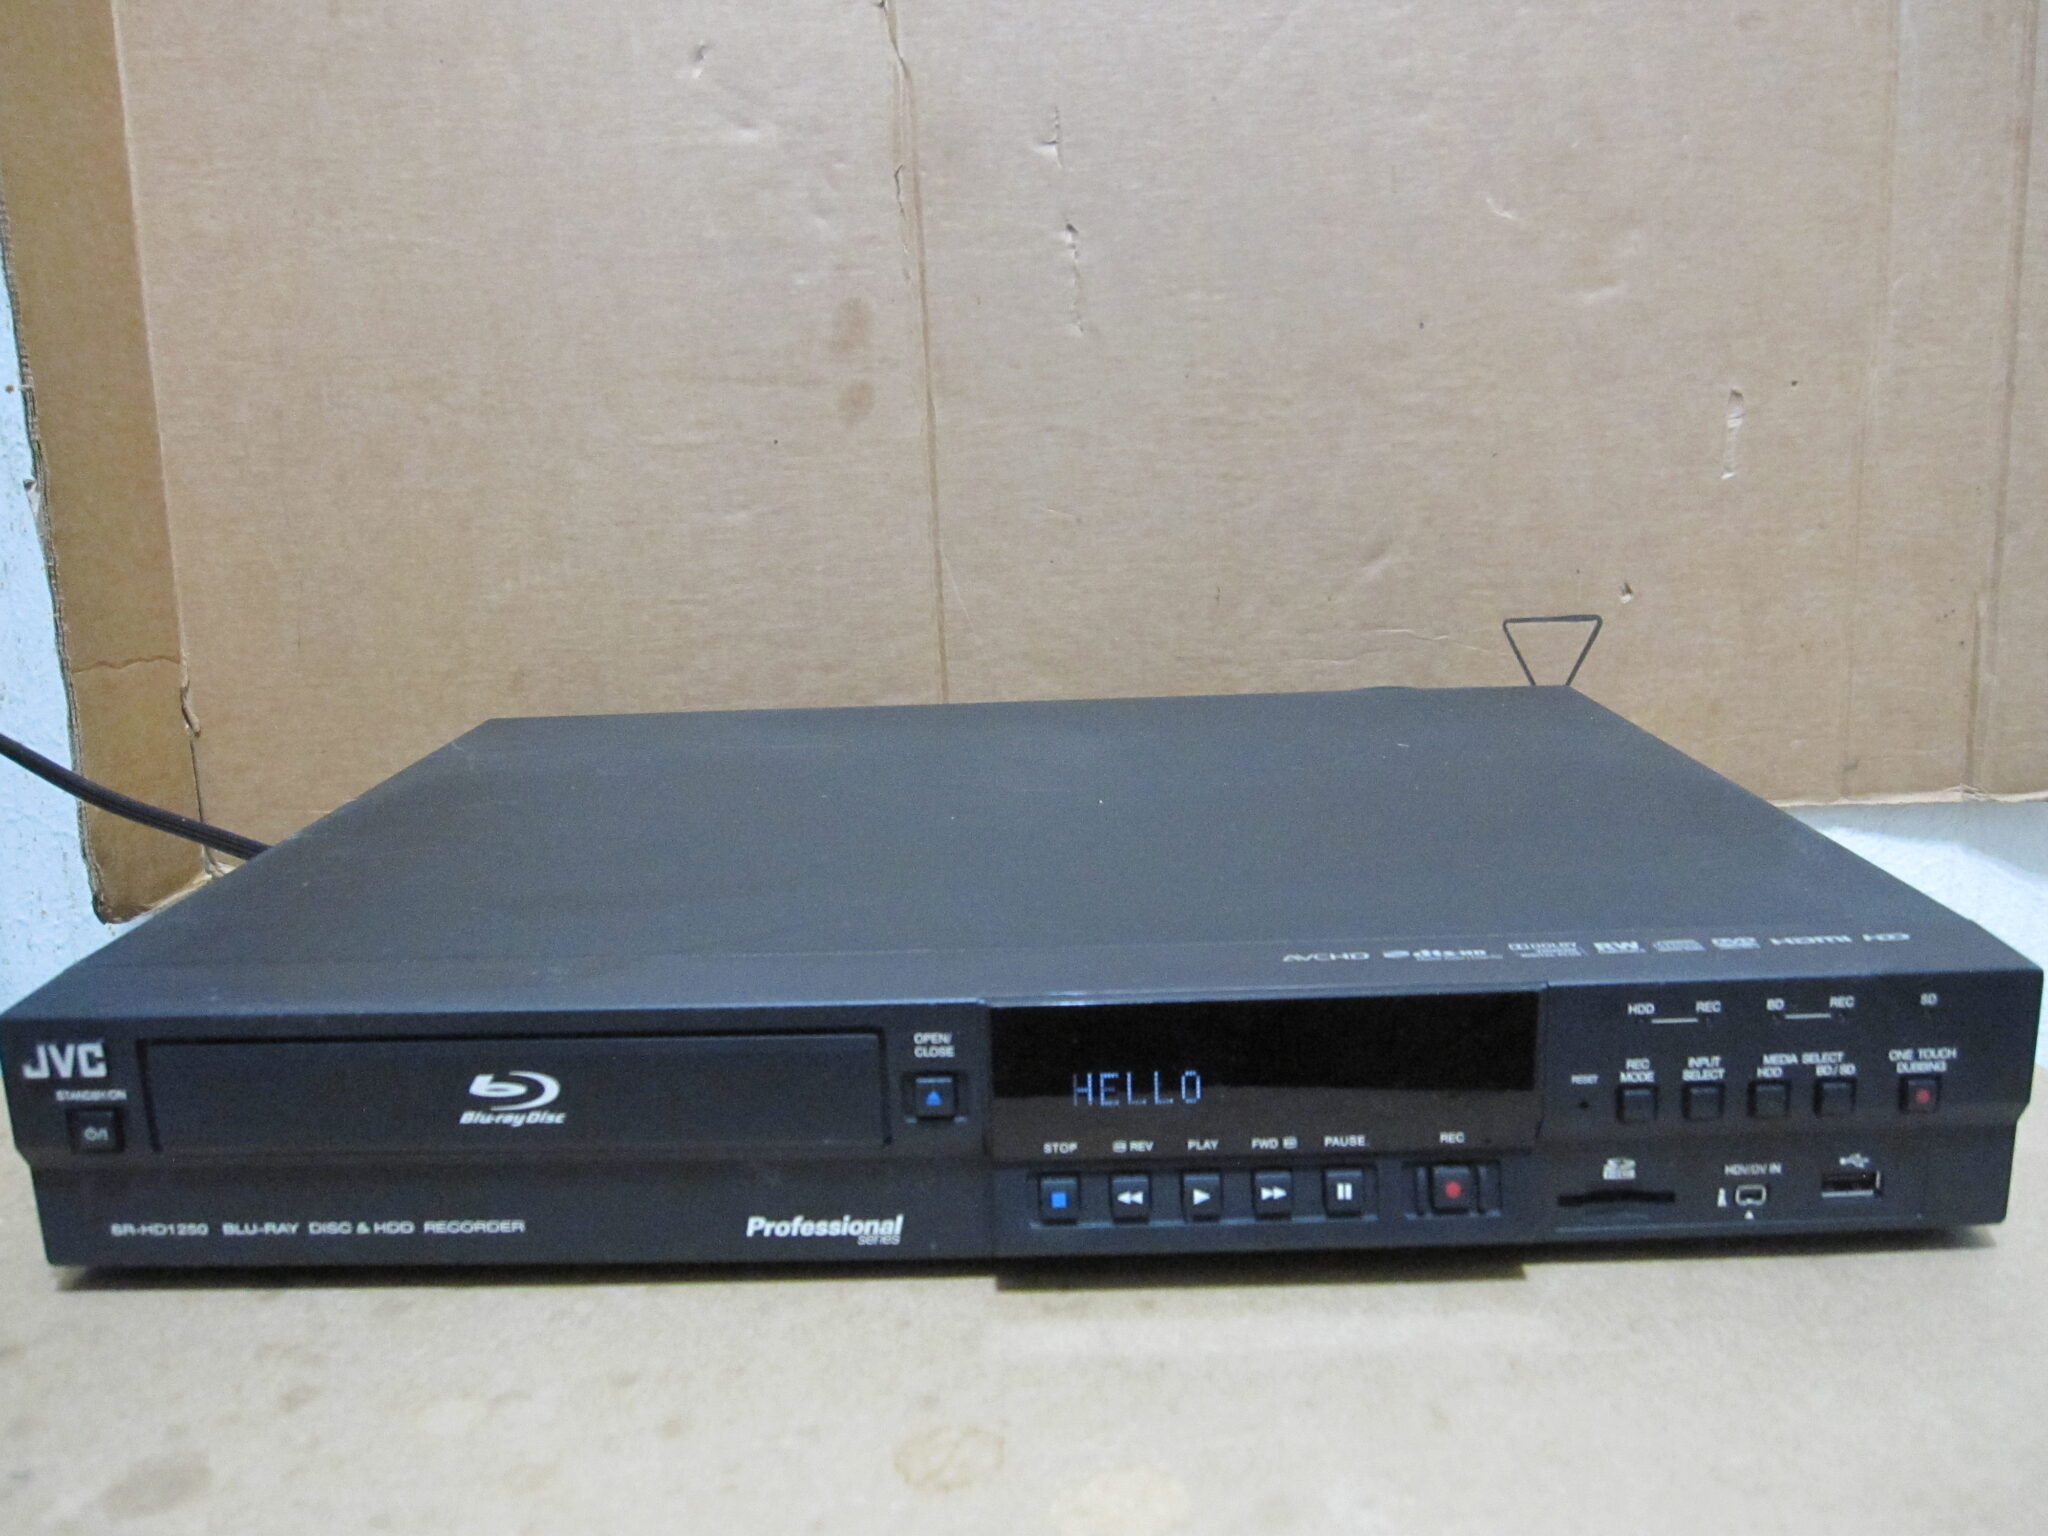 hd dvd player and recorder combo